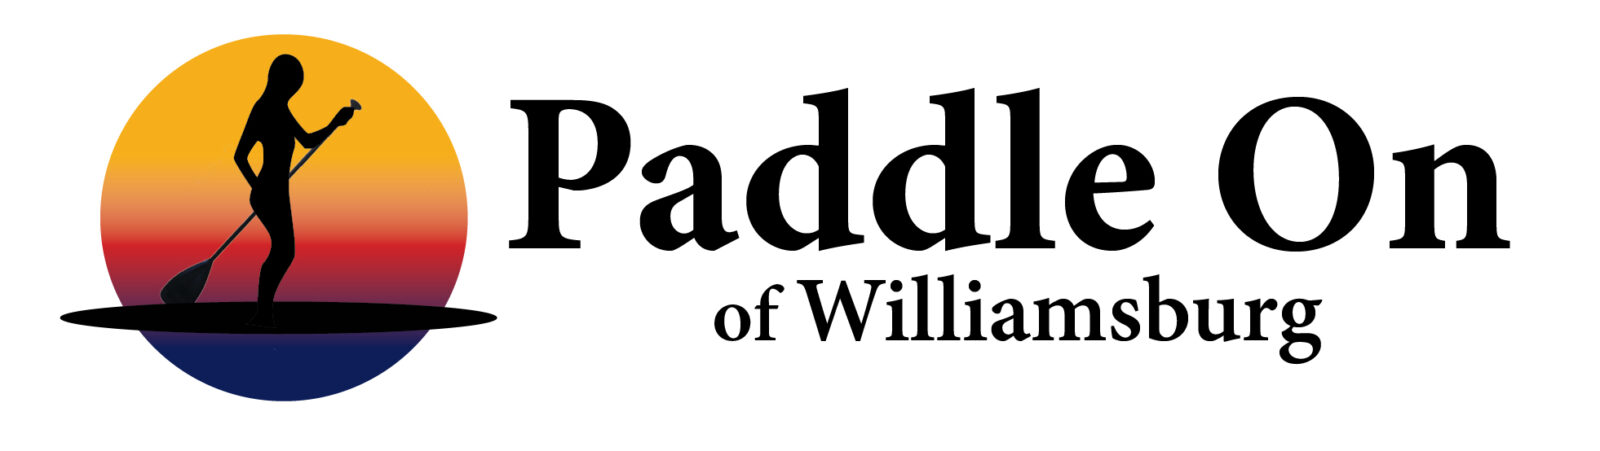 Paddle-On-Williams-final